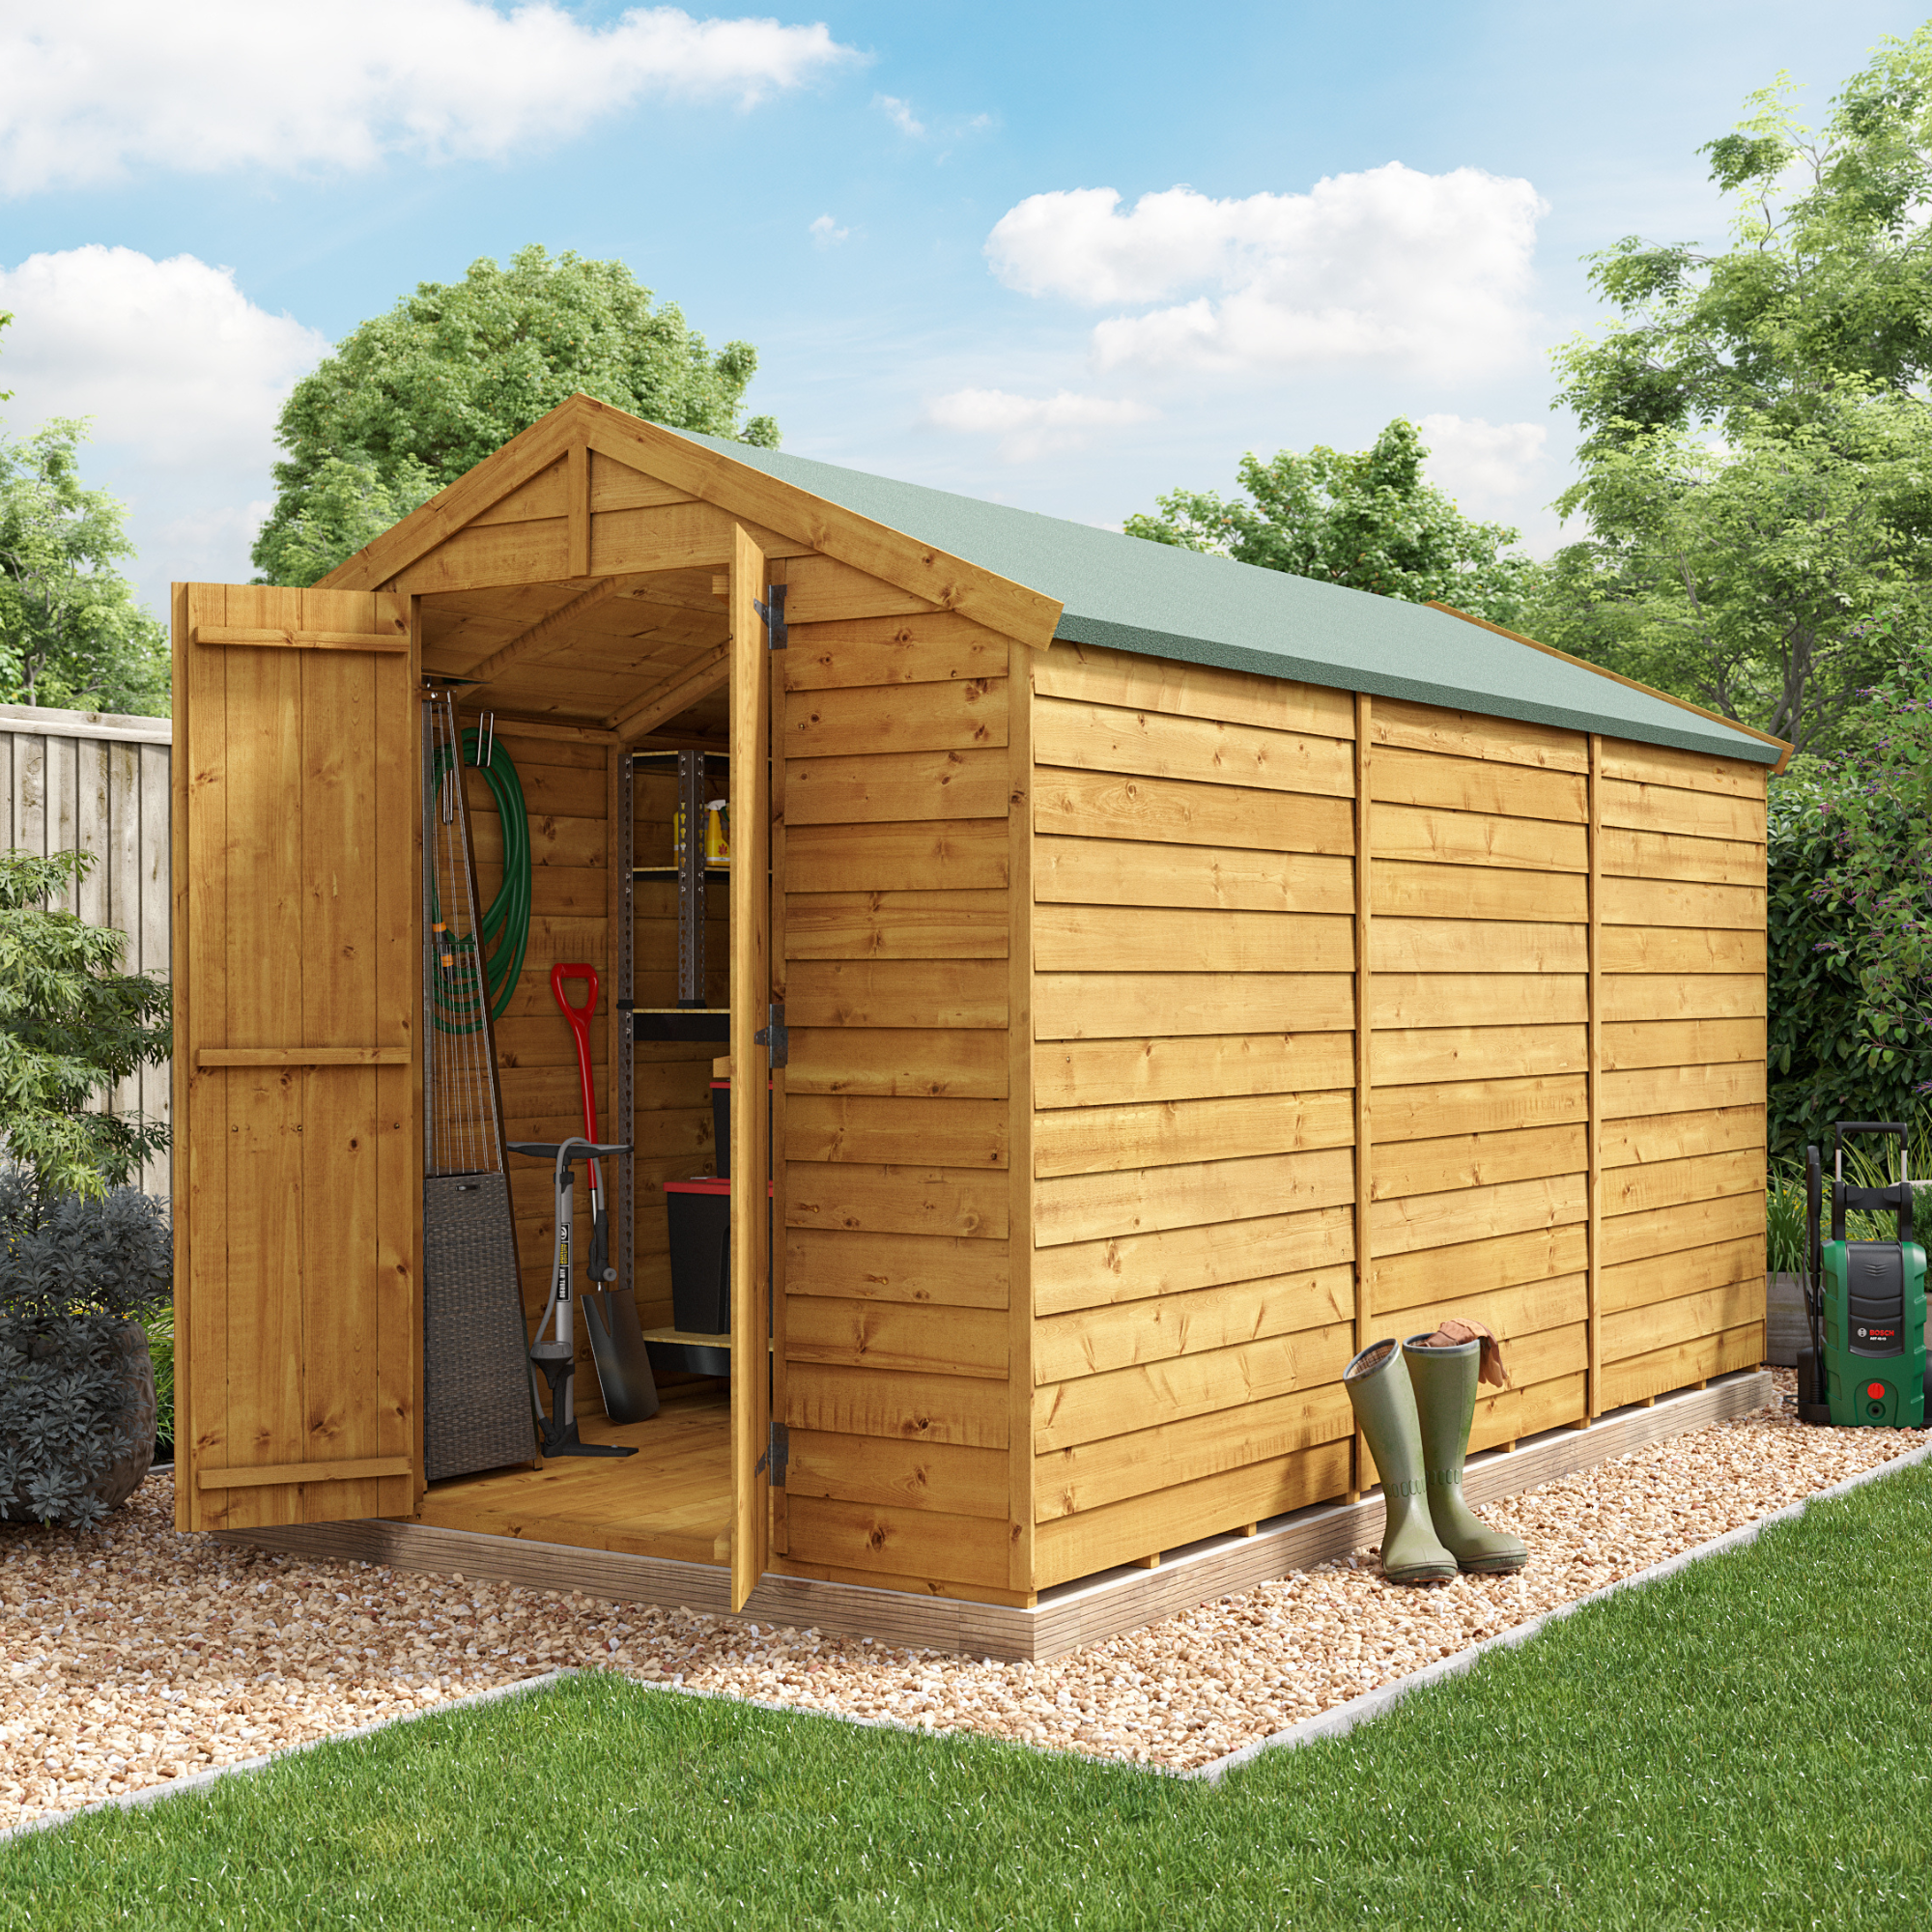 12 x 8 Shed - BillyOh Keeper Overlap Apex Wooden Shed - Windowless 12x6 Garden Shed